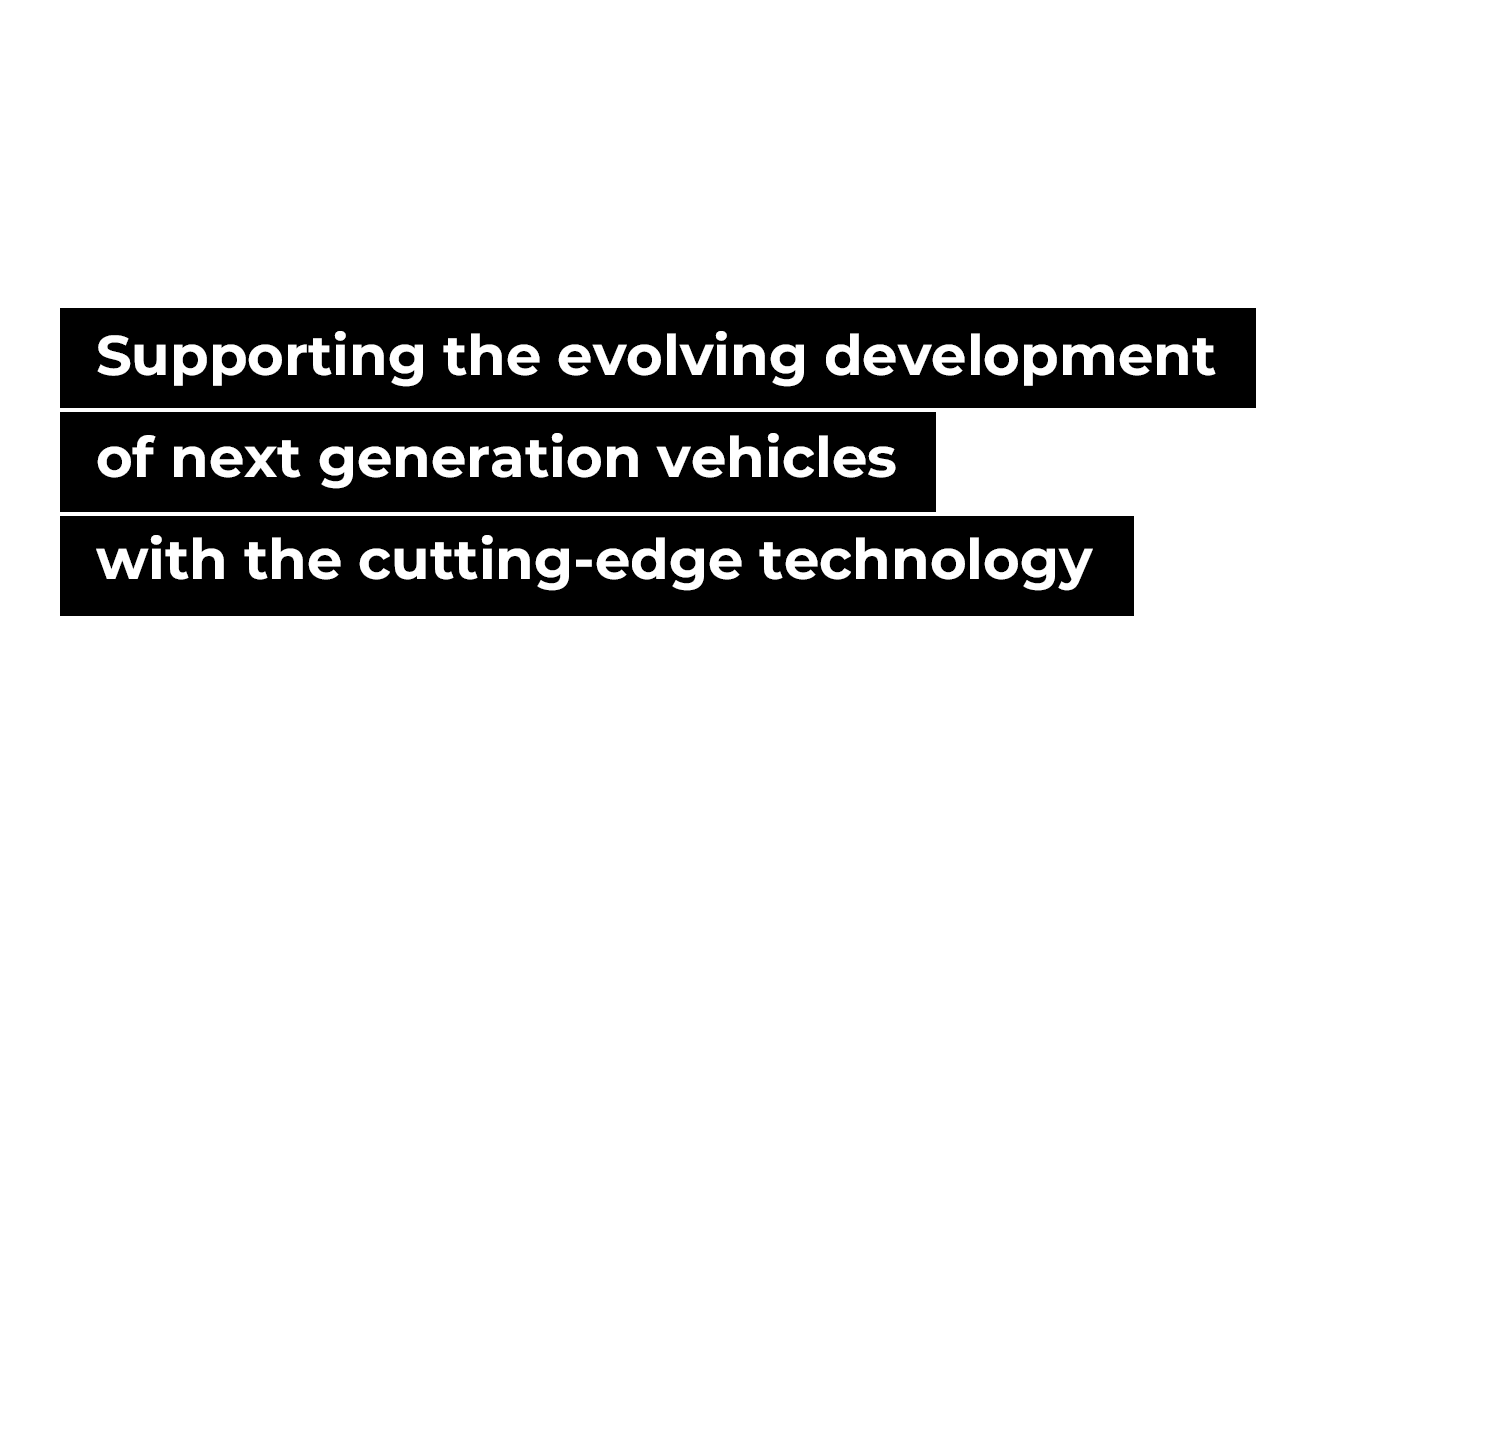 Supporting the evolving development of next generation vehicles with the cutting-edge technology